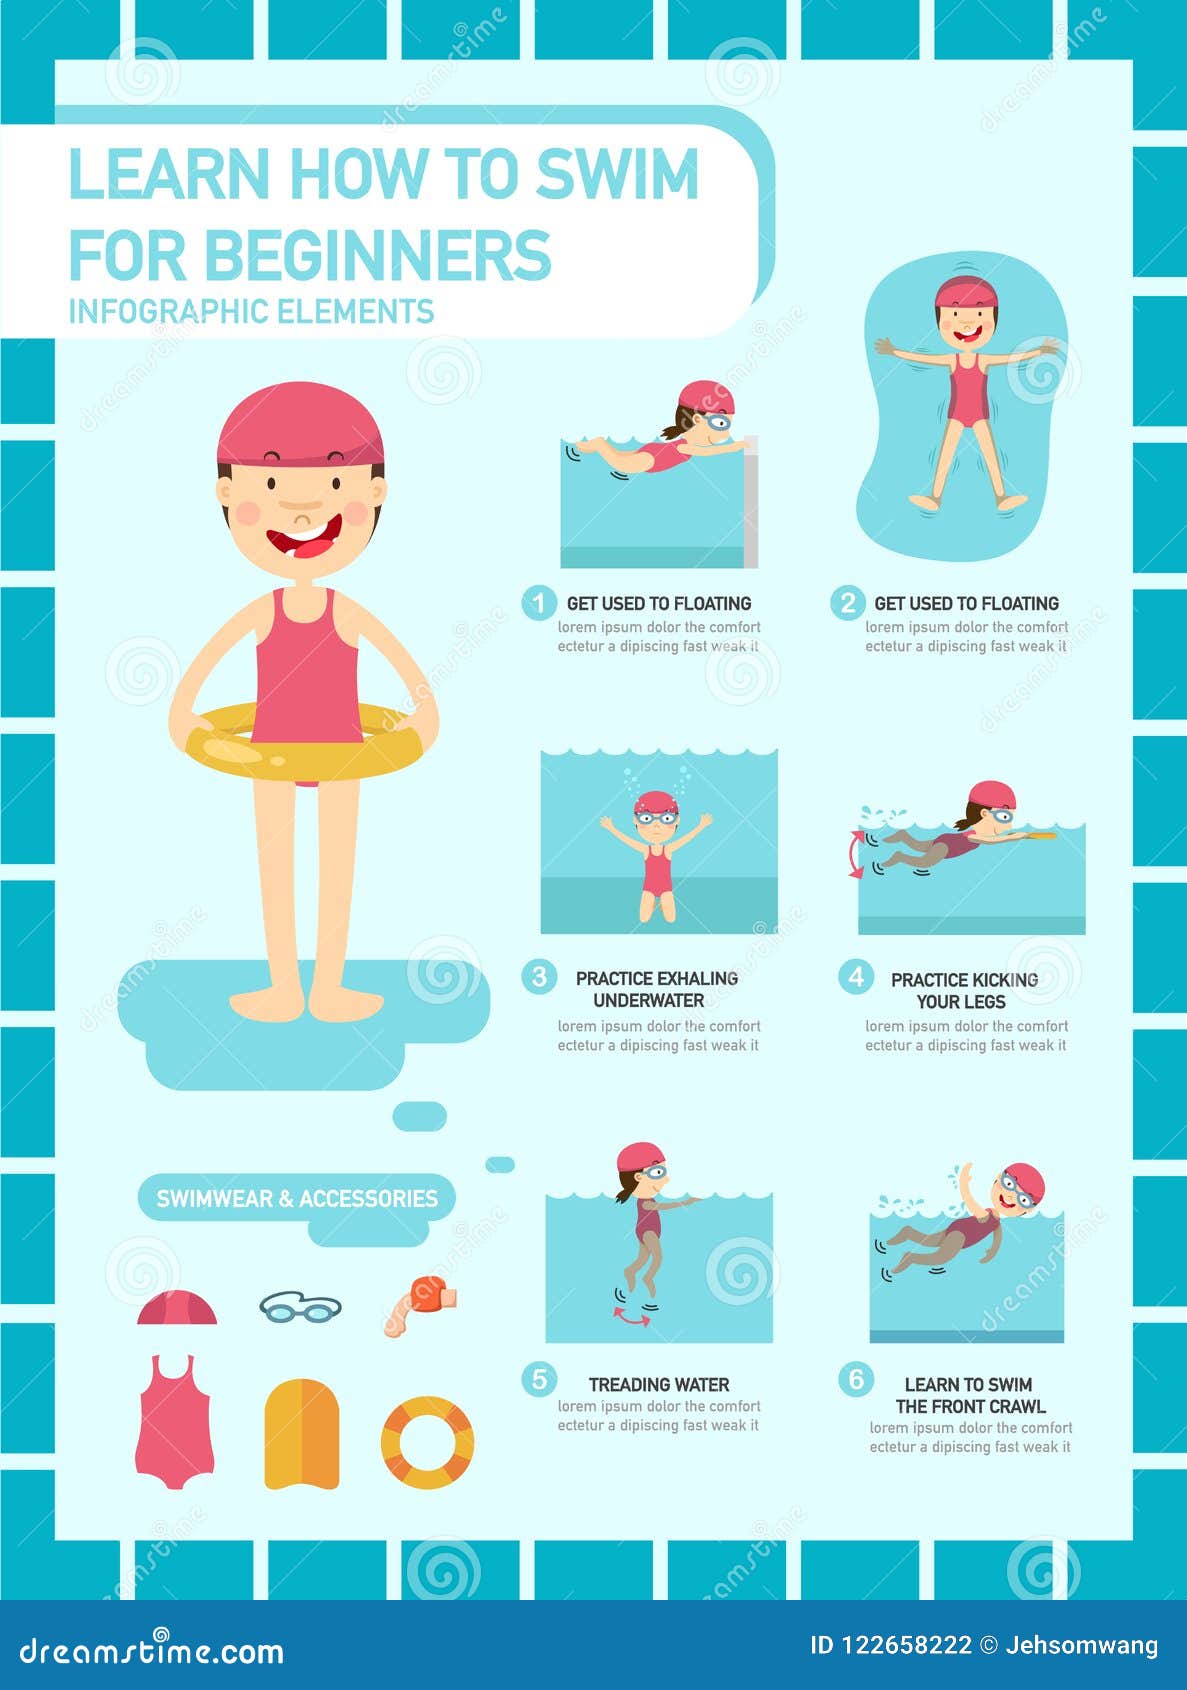 learn how to swim for beginners infographic